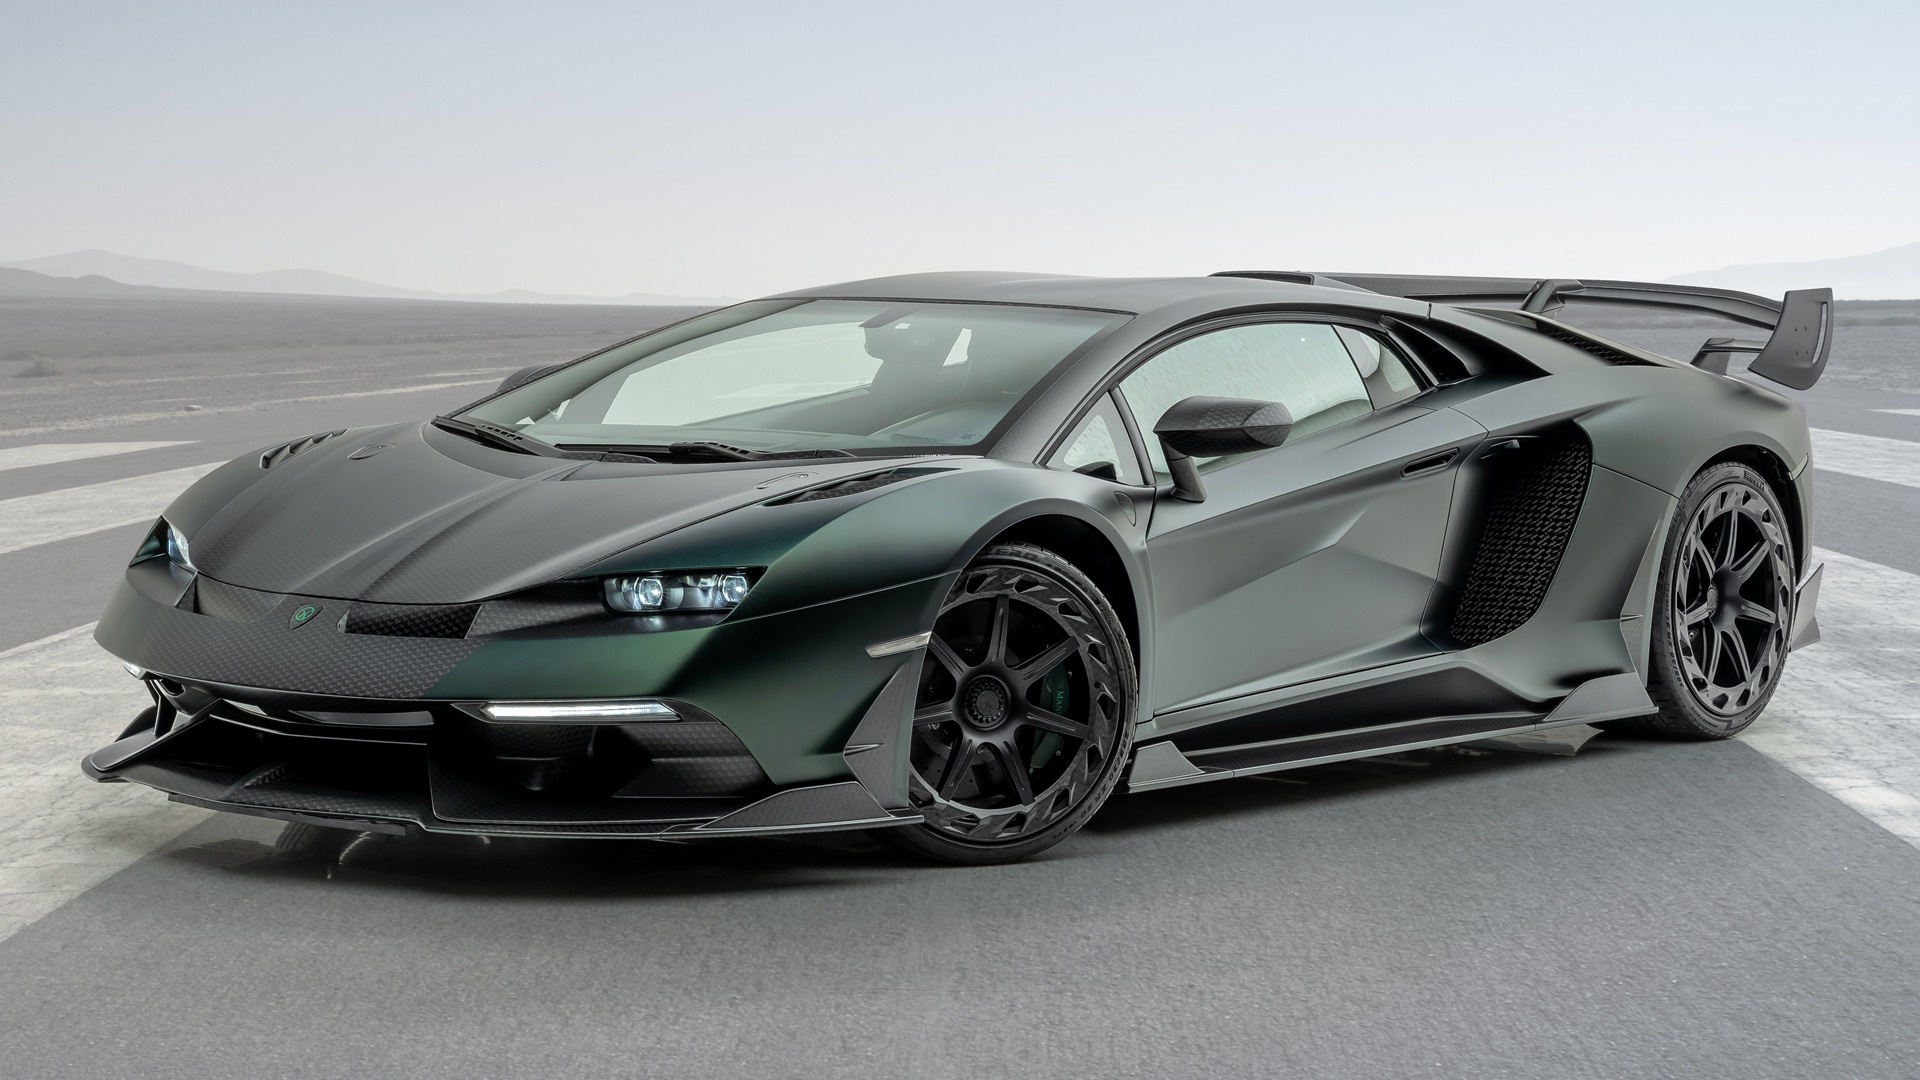 Free download wallpaper Vehicles, Mansory Cabrera on your PC desktop